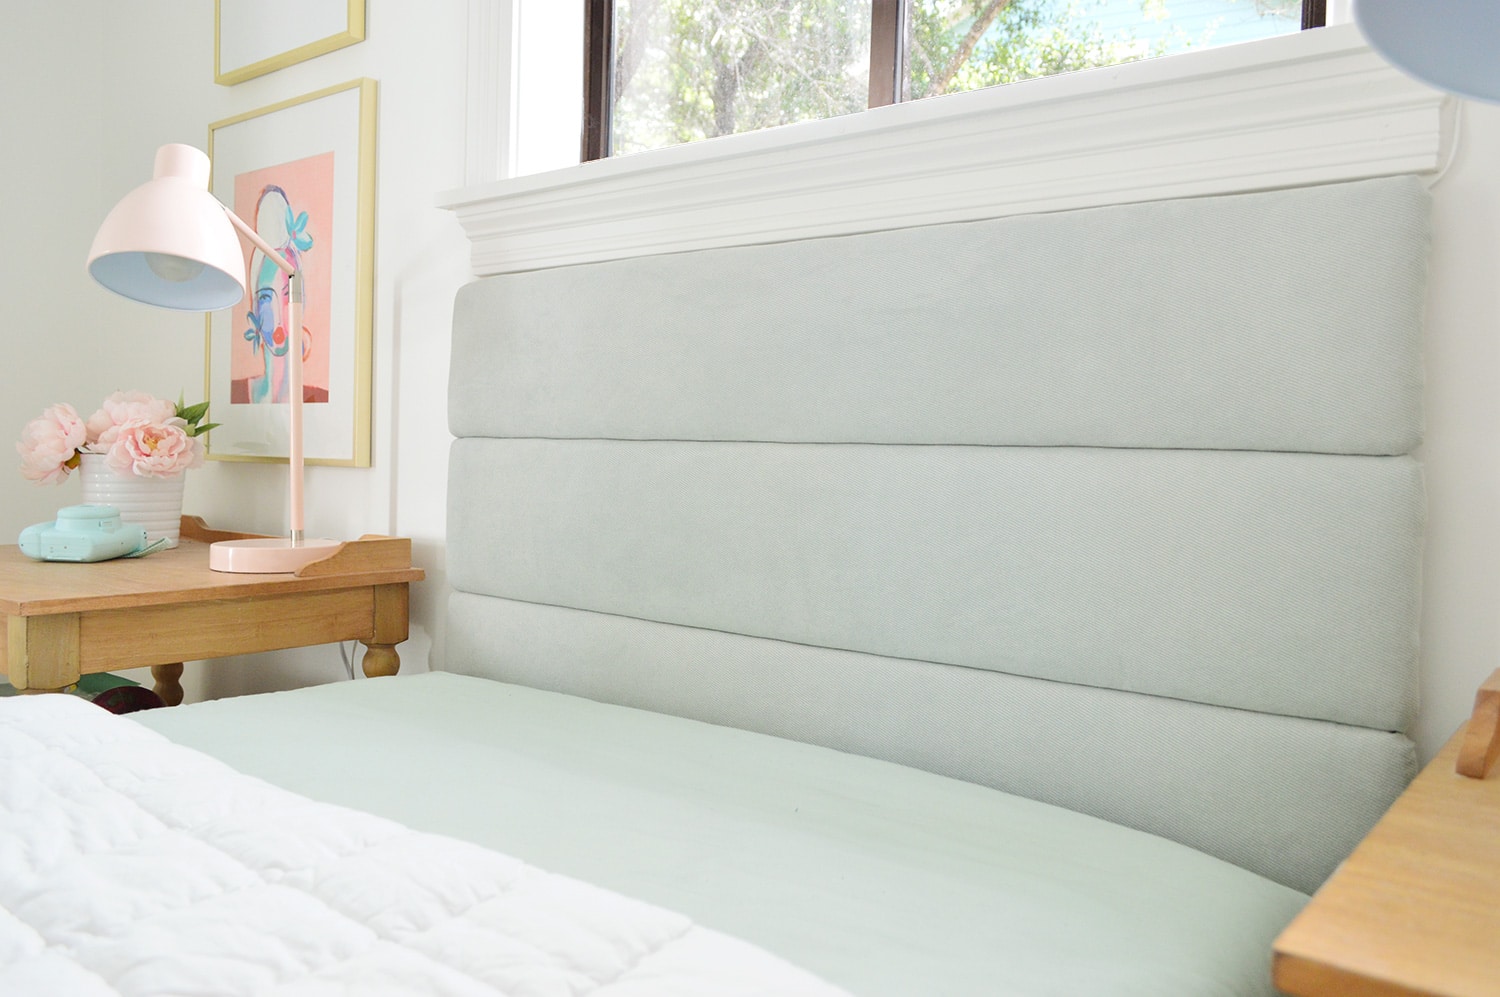 How To Make A DIY Channel Tufted Headboard (& How Our Daughter's Room